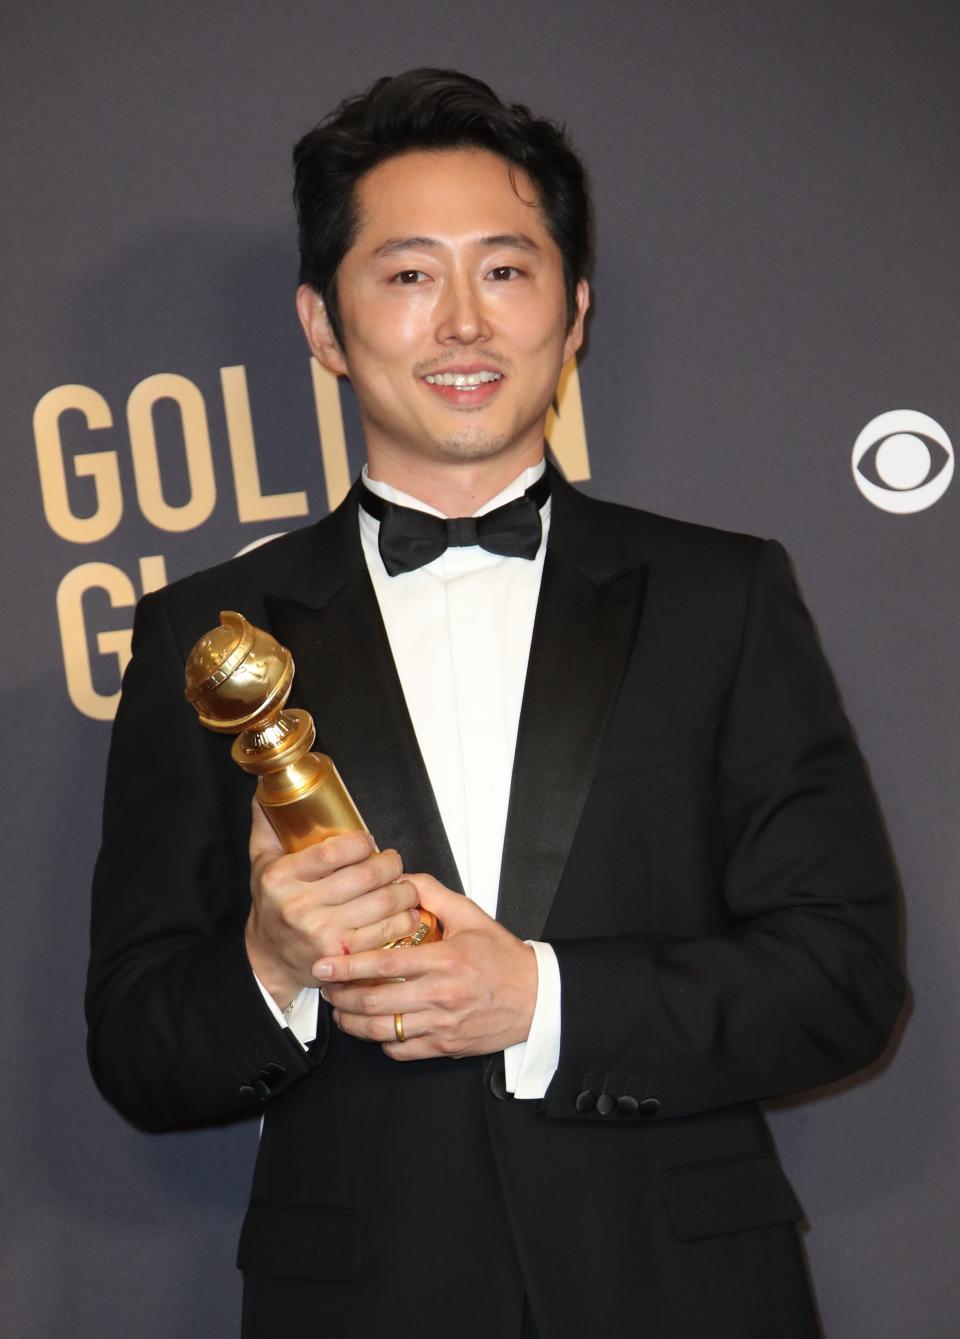 "Beef" star Steven Yeun took home the Golden Globe for best actor in a limited series.